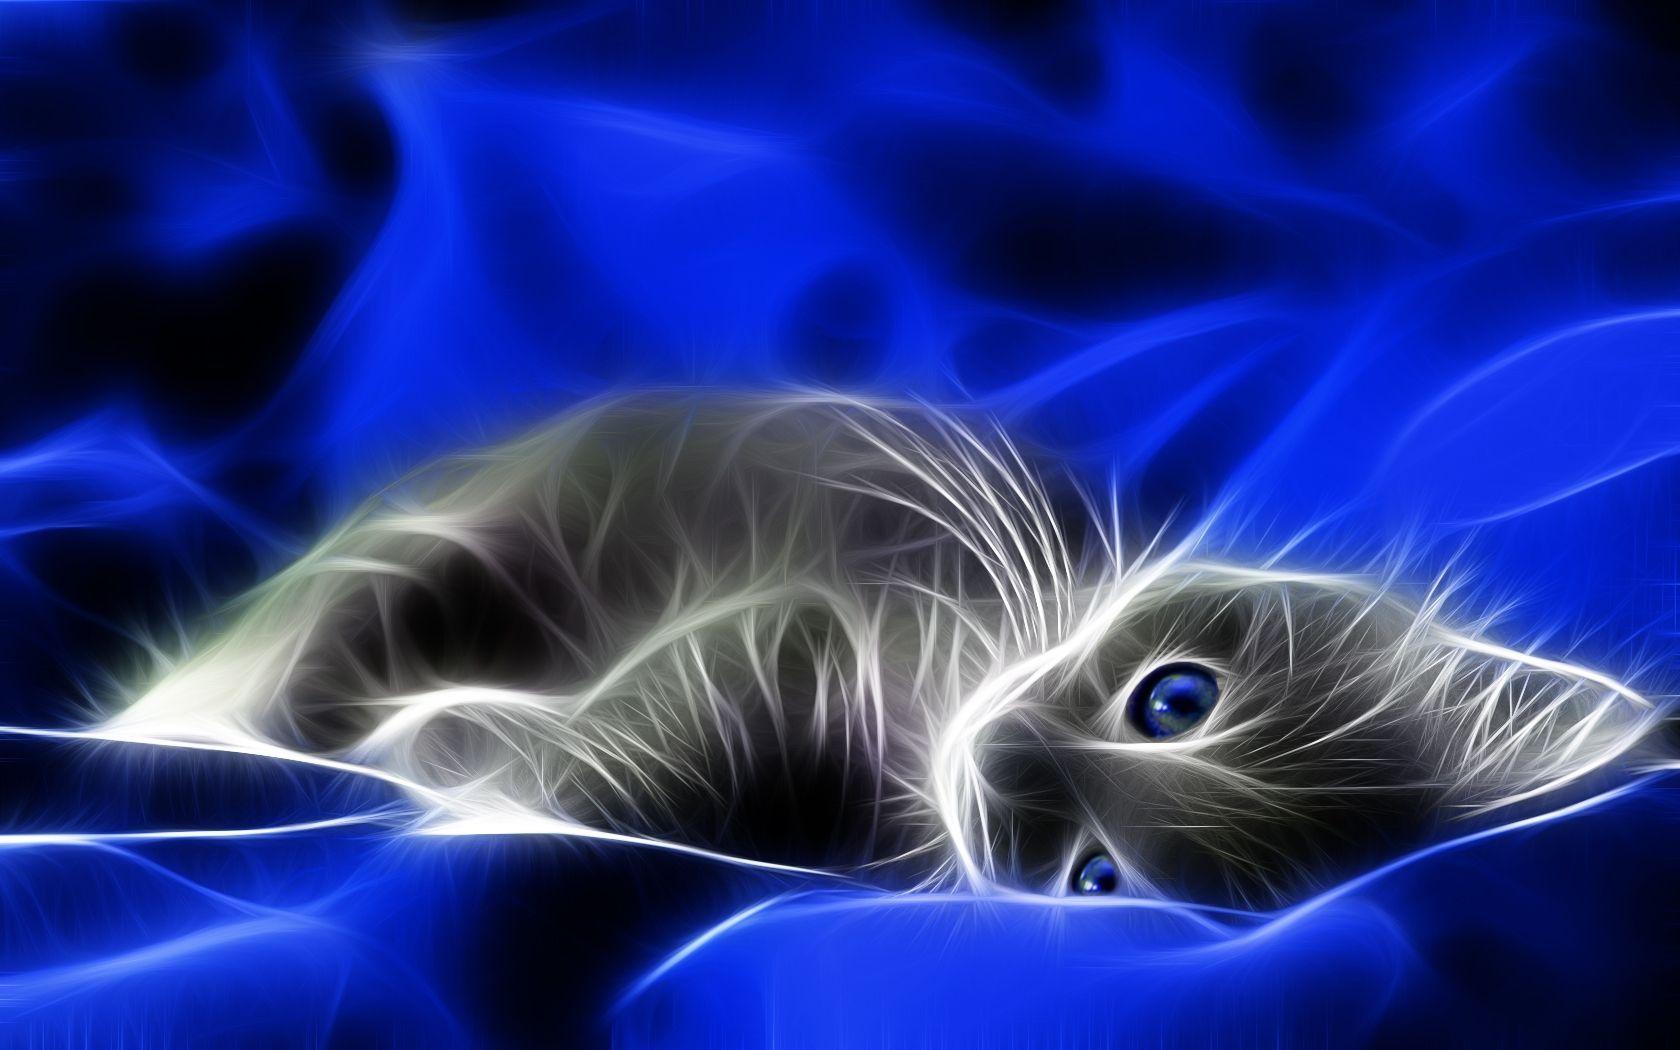 The Best And Coolest High Definition 3D Wallpaper. Moving Wallpaper, Cat Wallpaper, Kitten Wallpaper